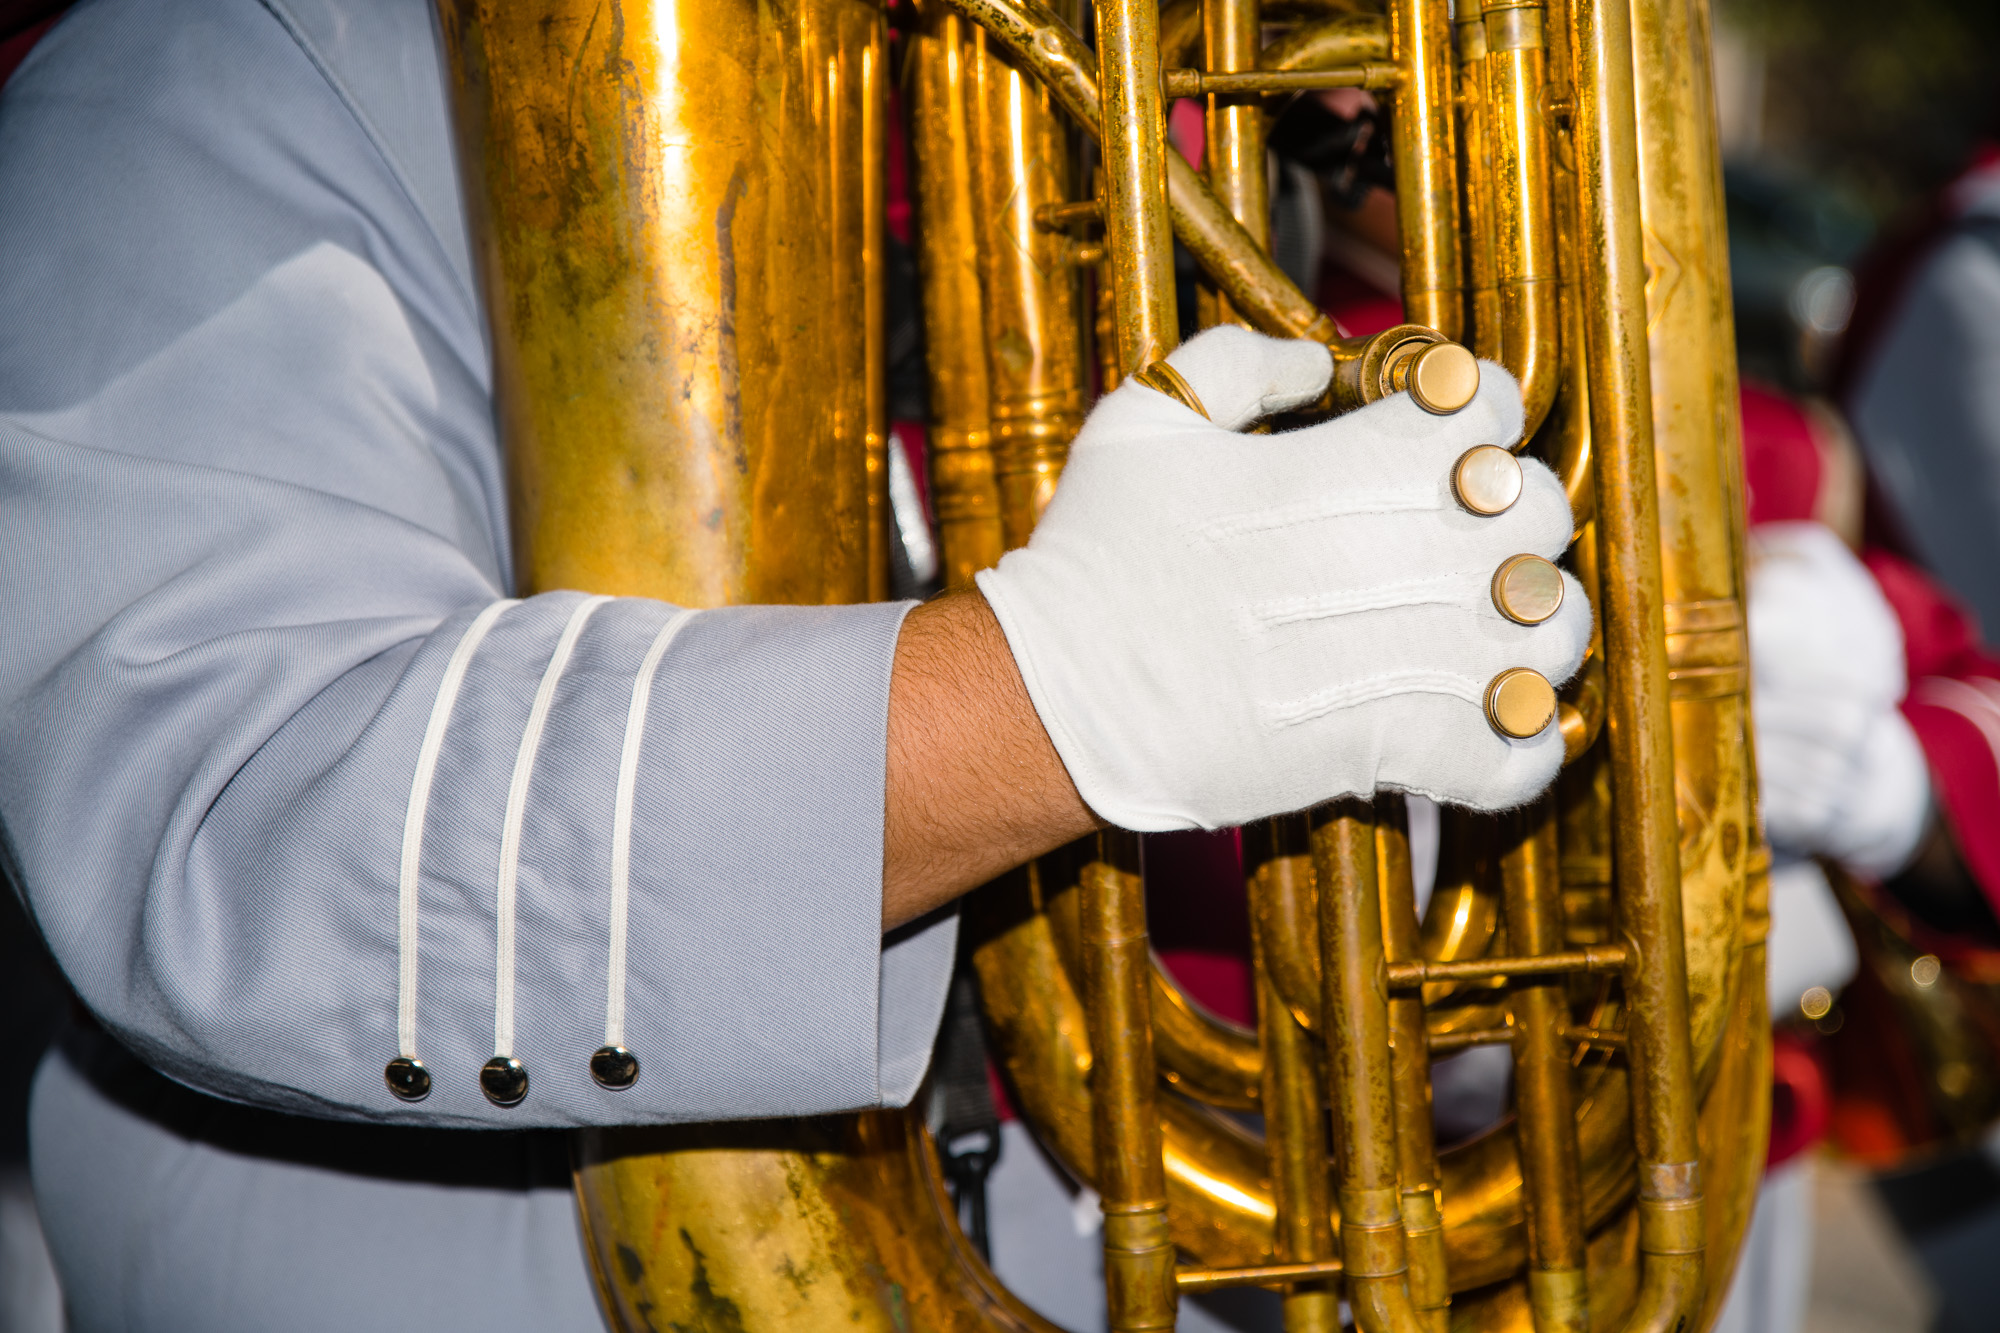 A detail photograph of a tuba player holding their instrument.